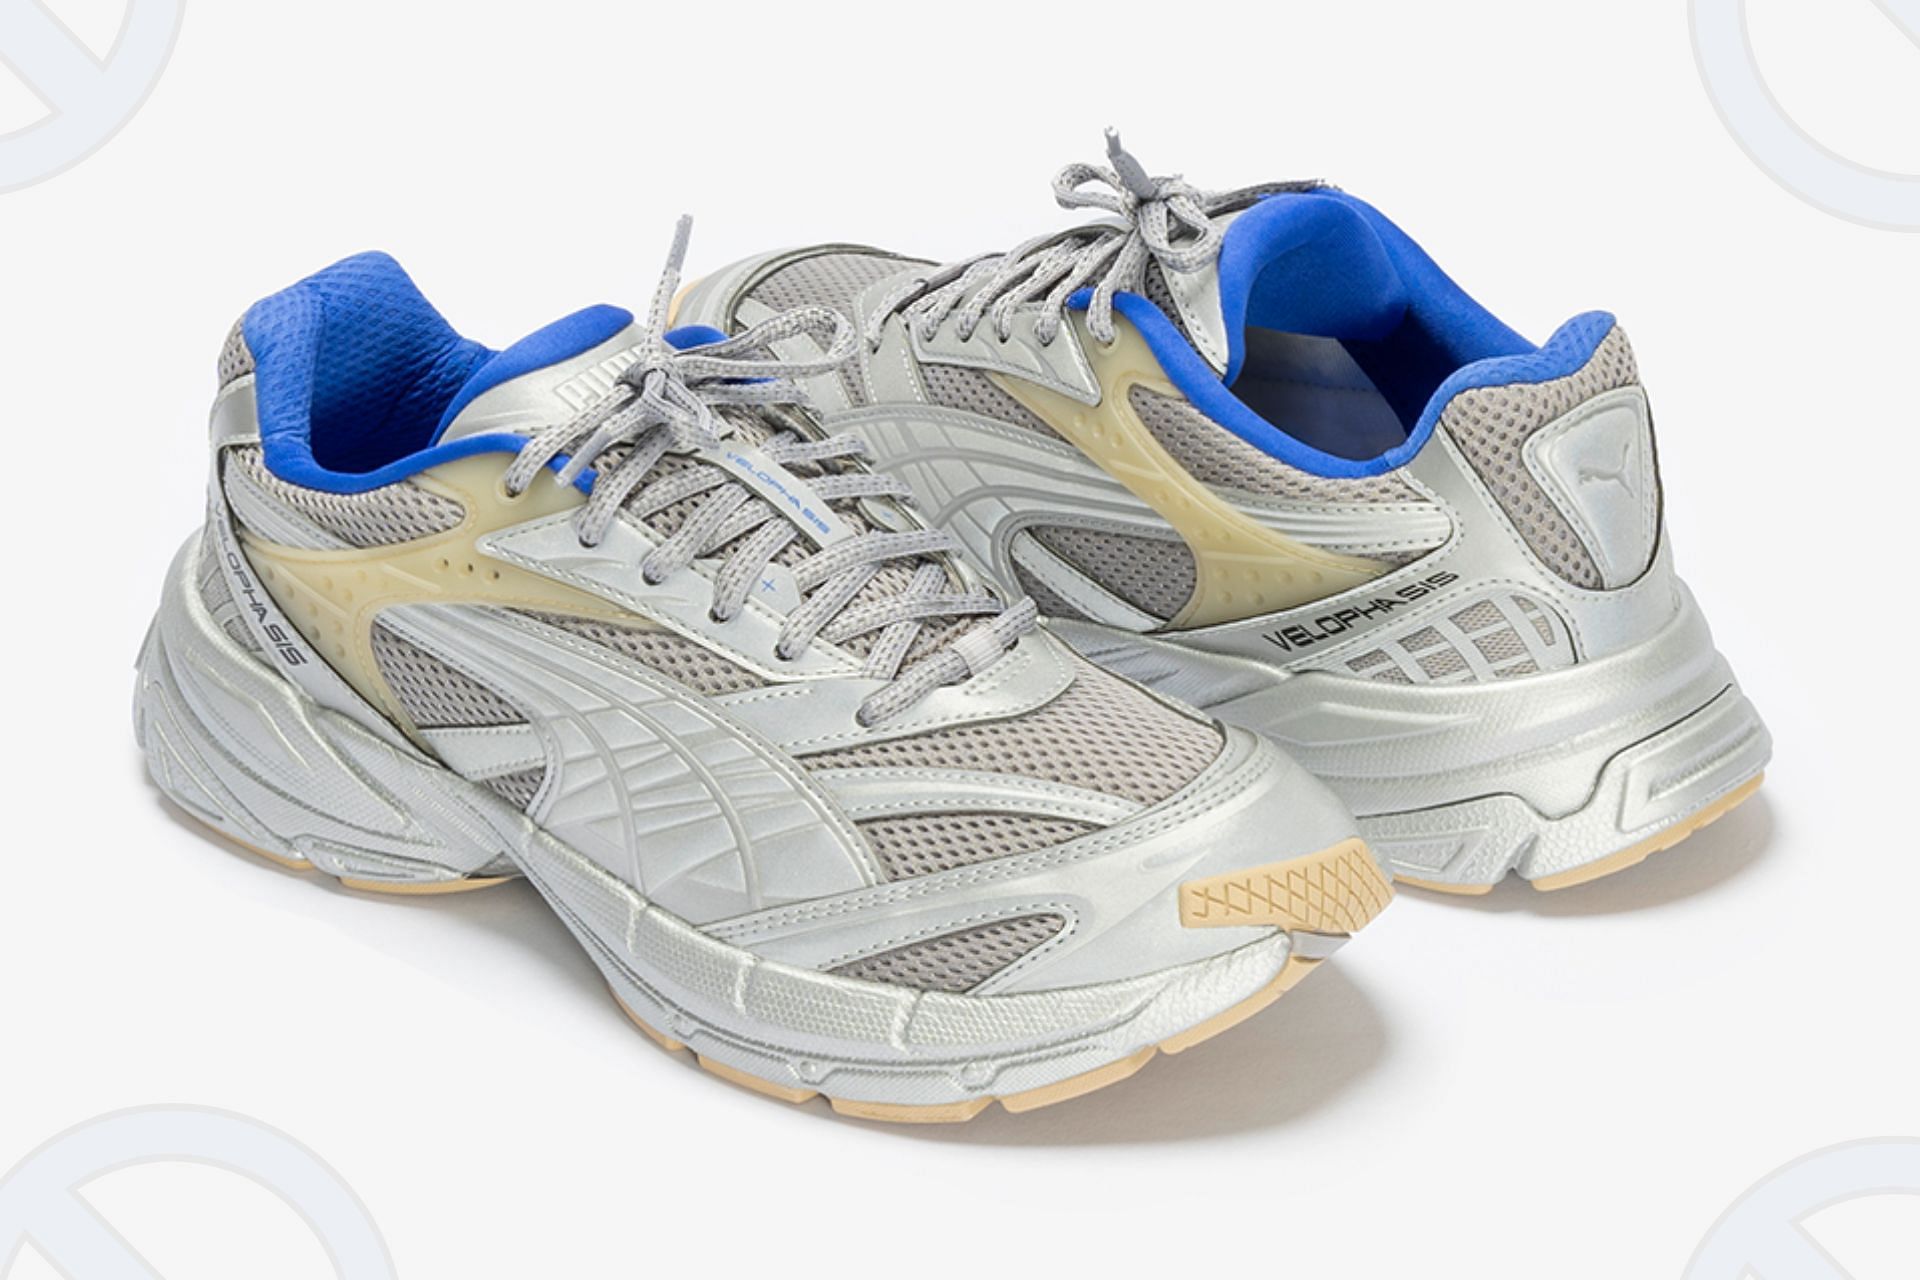 Puma Velophasis sneakers: Where to buy, release date, and more explored